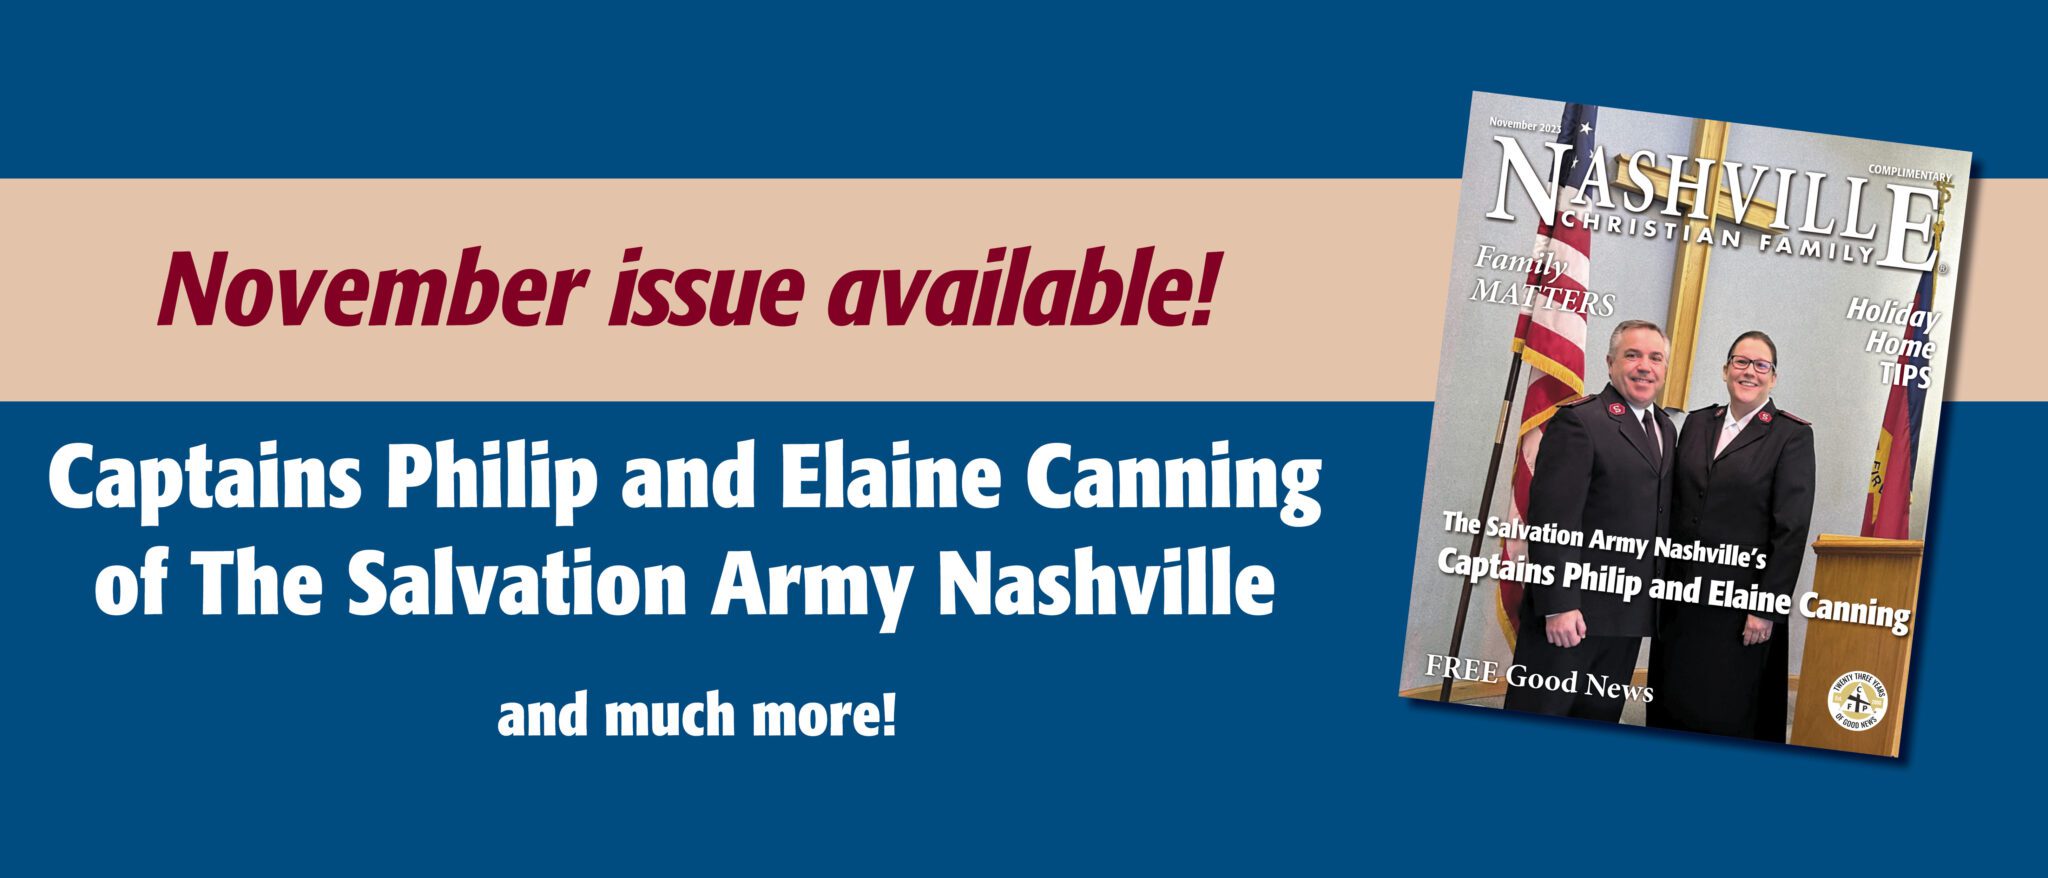 Download The Latest Issue of Nashville Christian Family | CBR